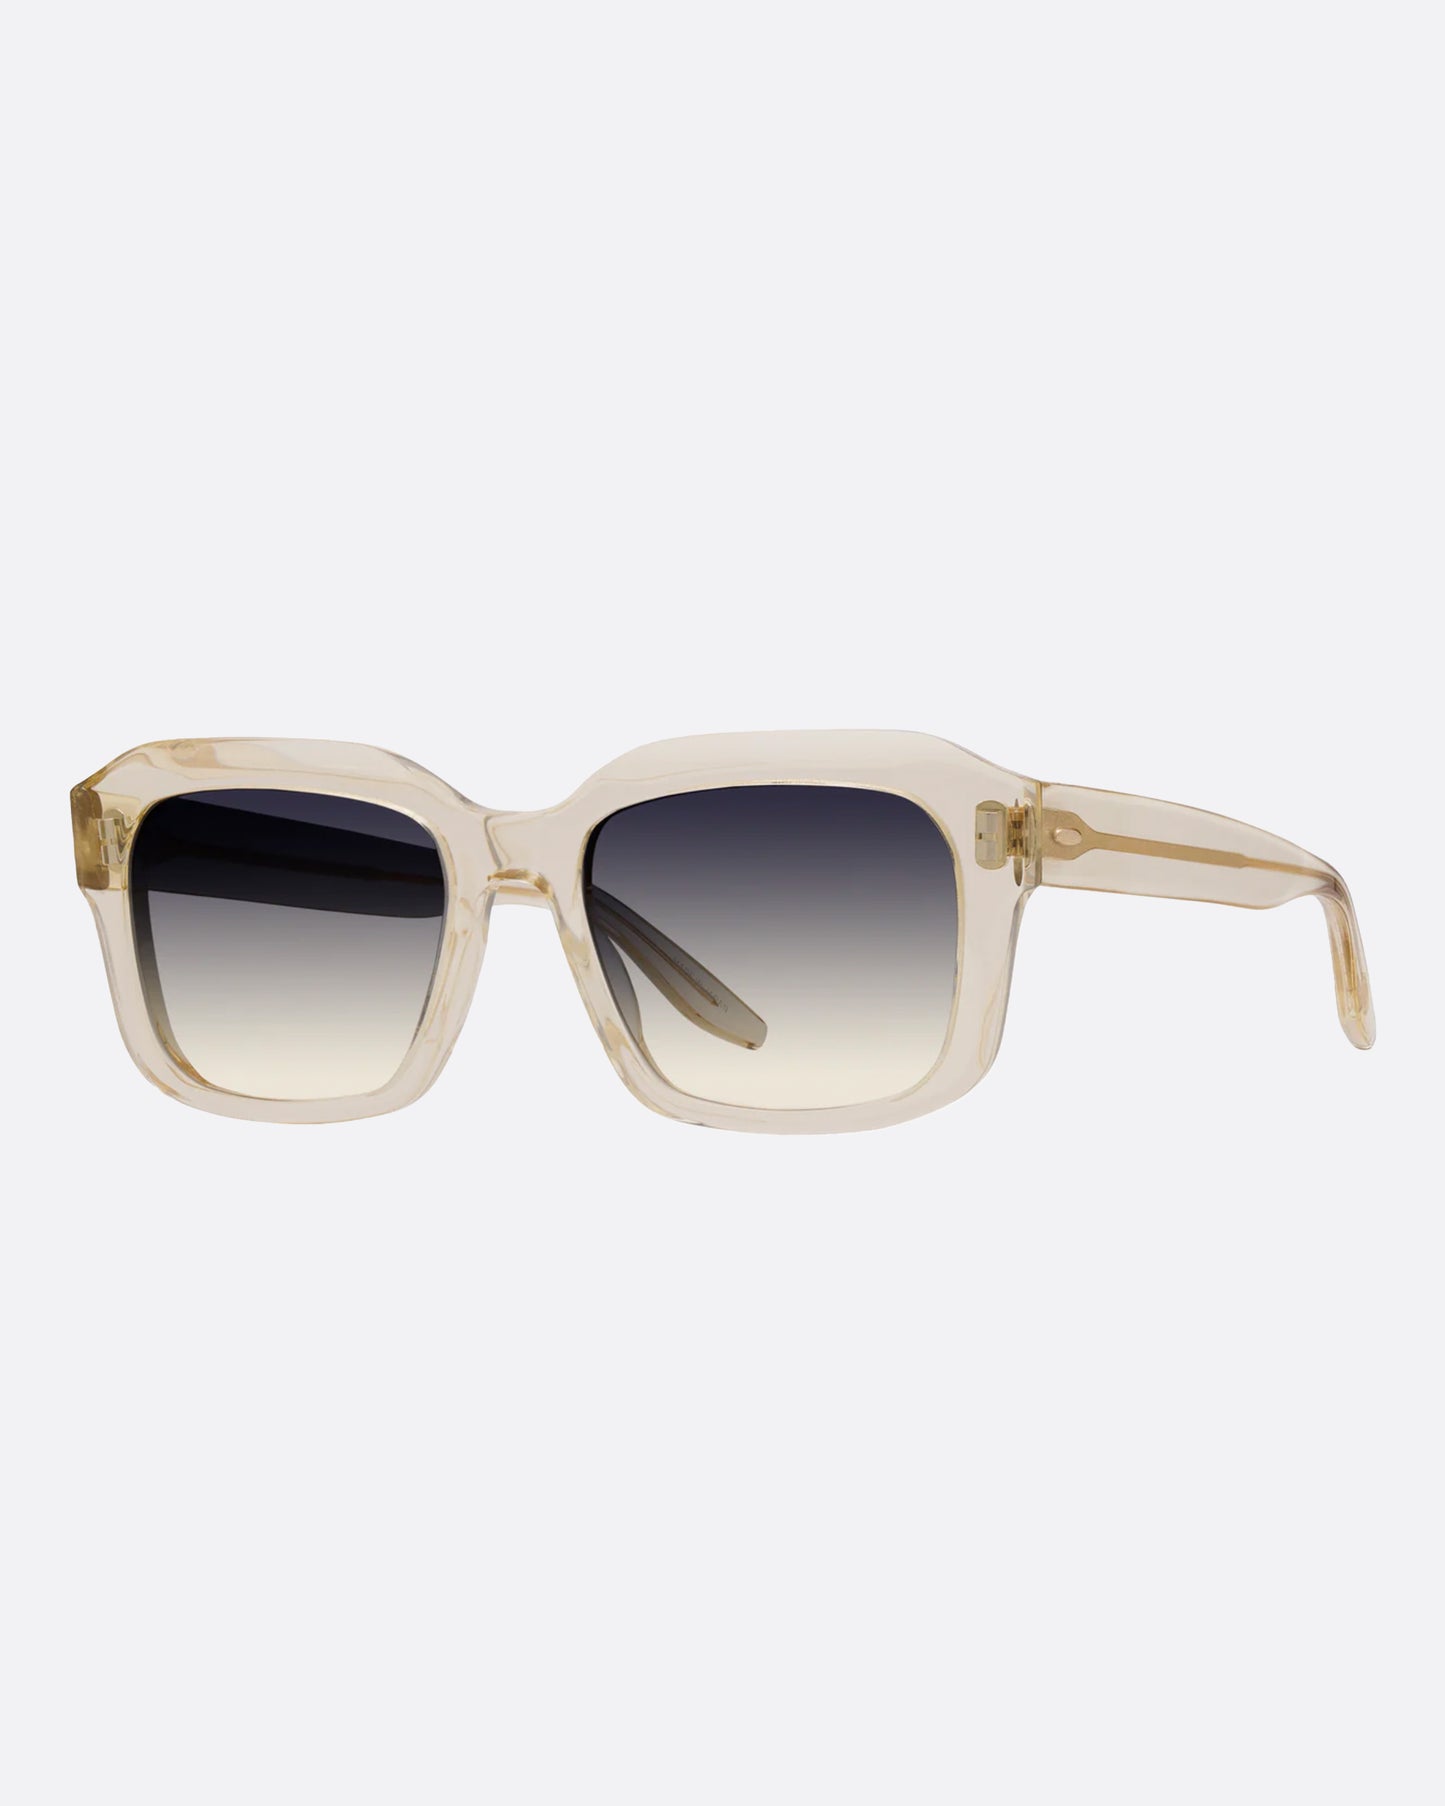 A pair of clear champagne acetate sunglasses with gray ombré lenses. Shown from the side.